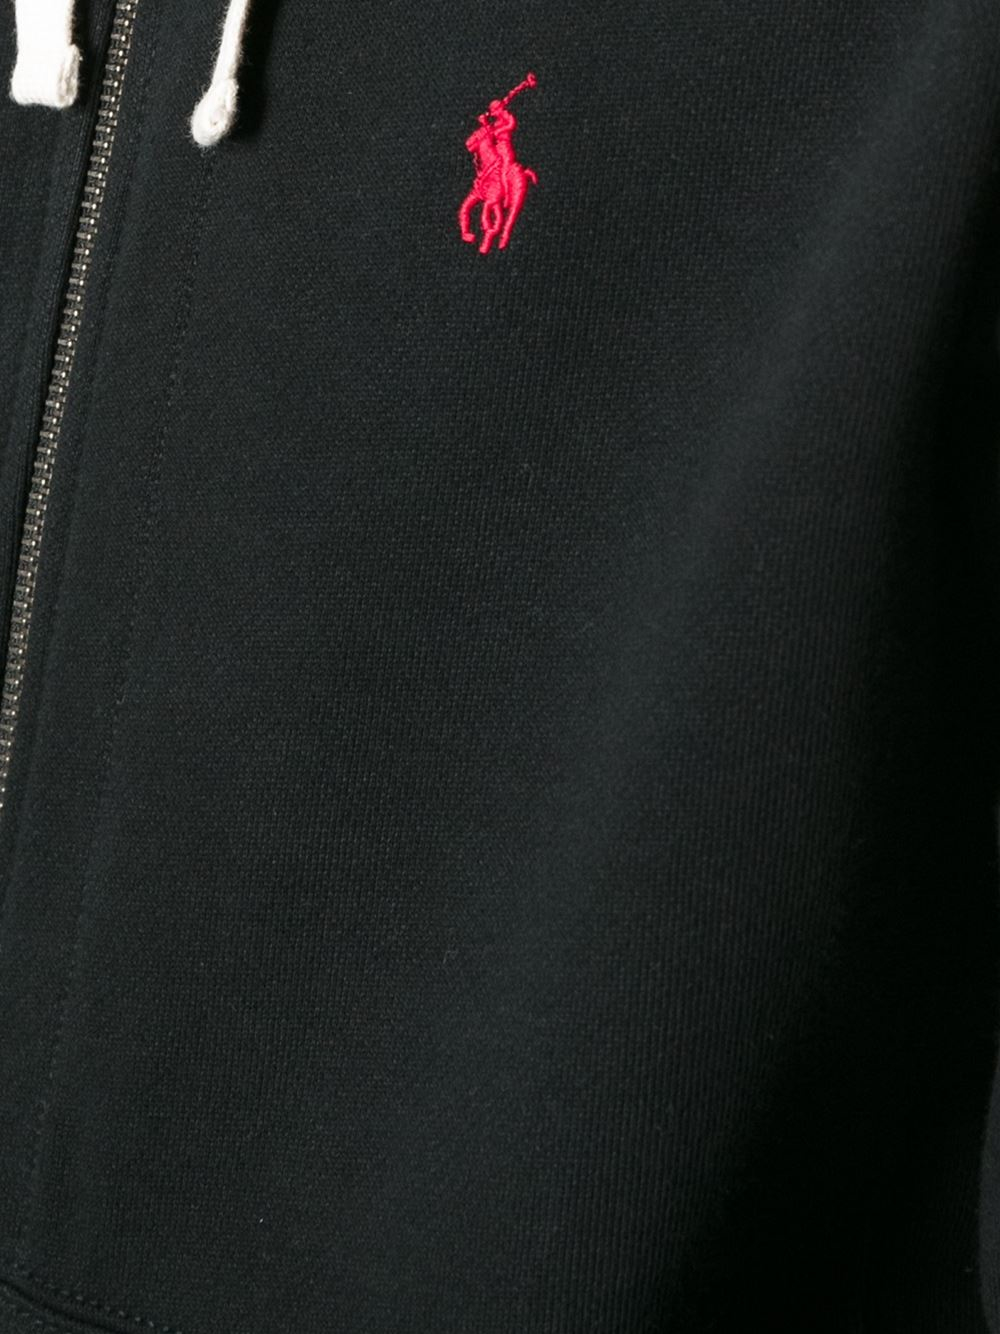 black polo hoodie with red horse